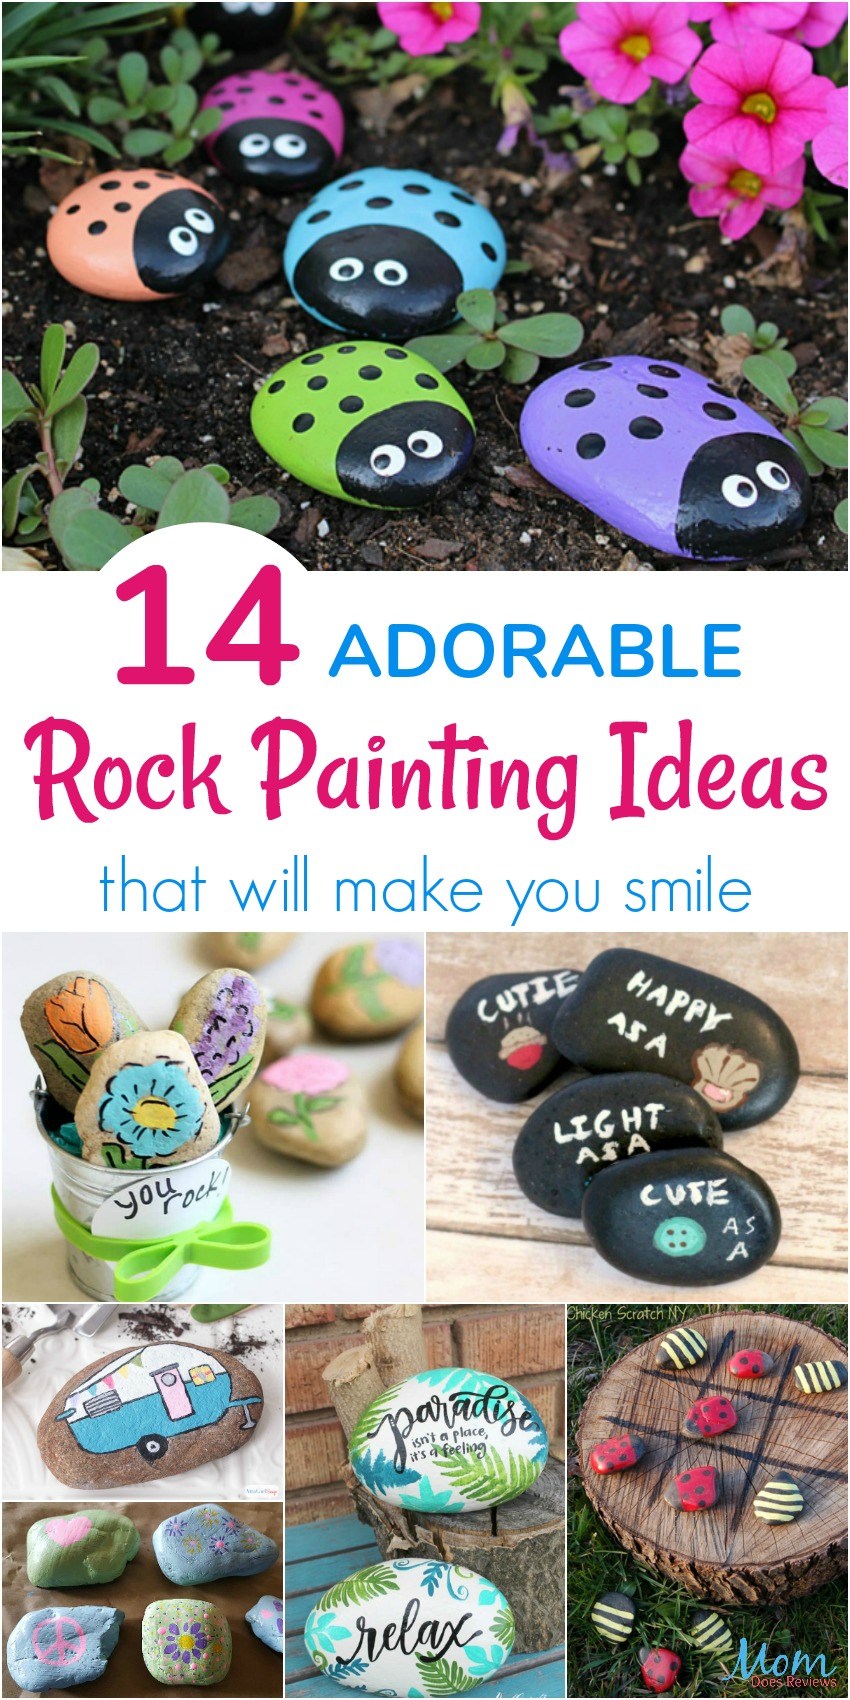 14 Adorable Rock Painting Ideas that will make you smile